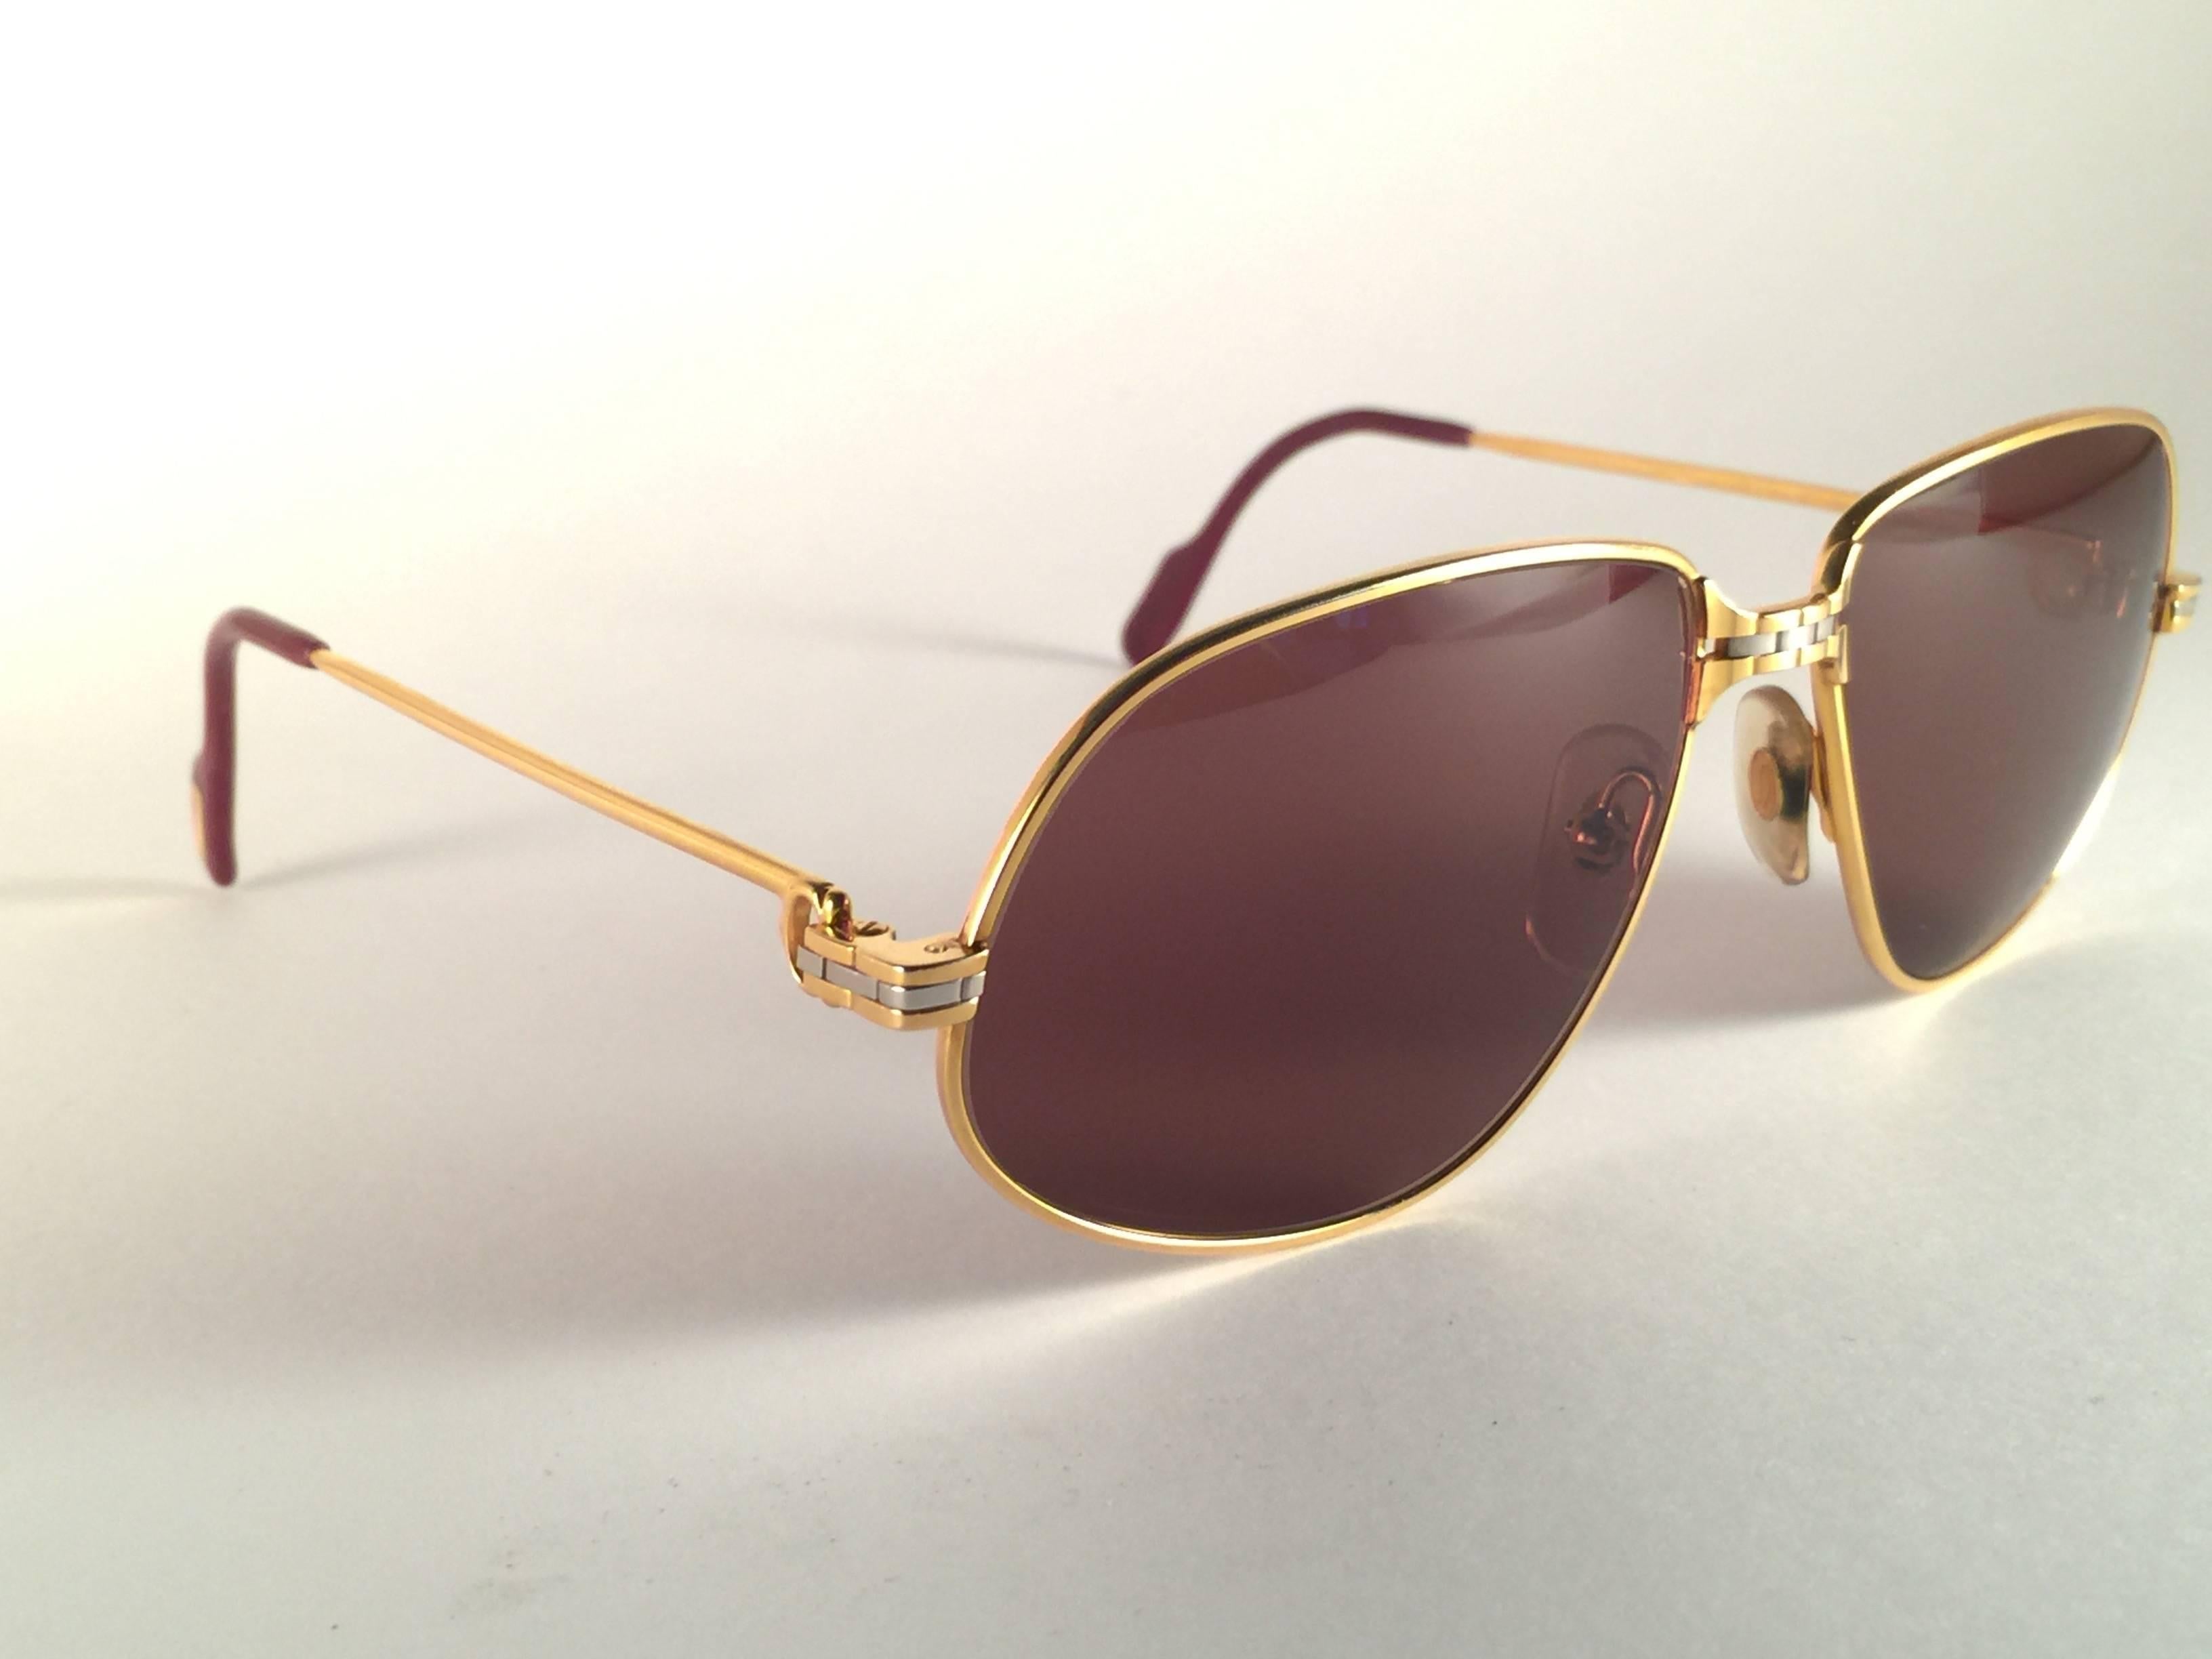 New Vintage Cartier Panthere 59mm Medium Sunglasses France 18k Gold Heavy Plated For Sale 1